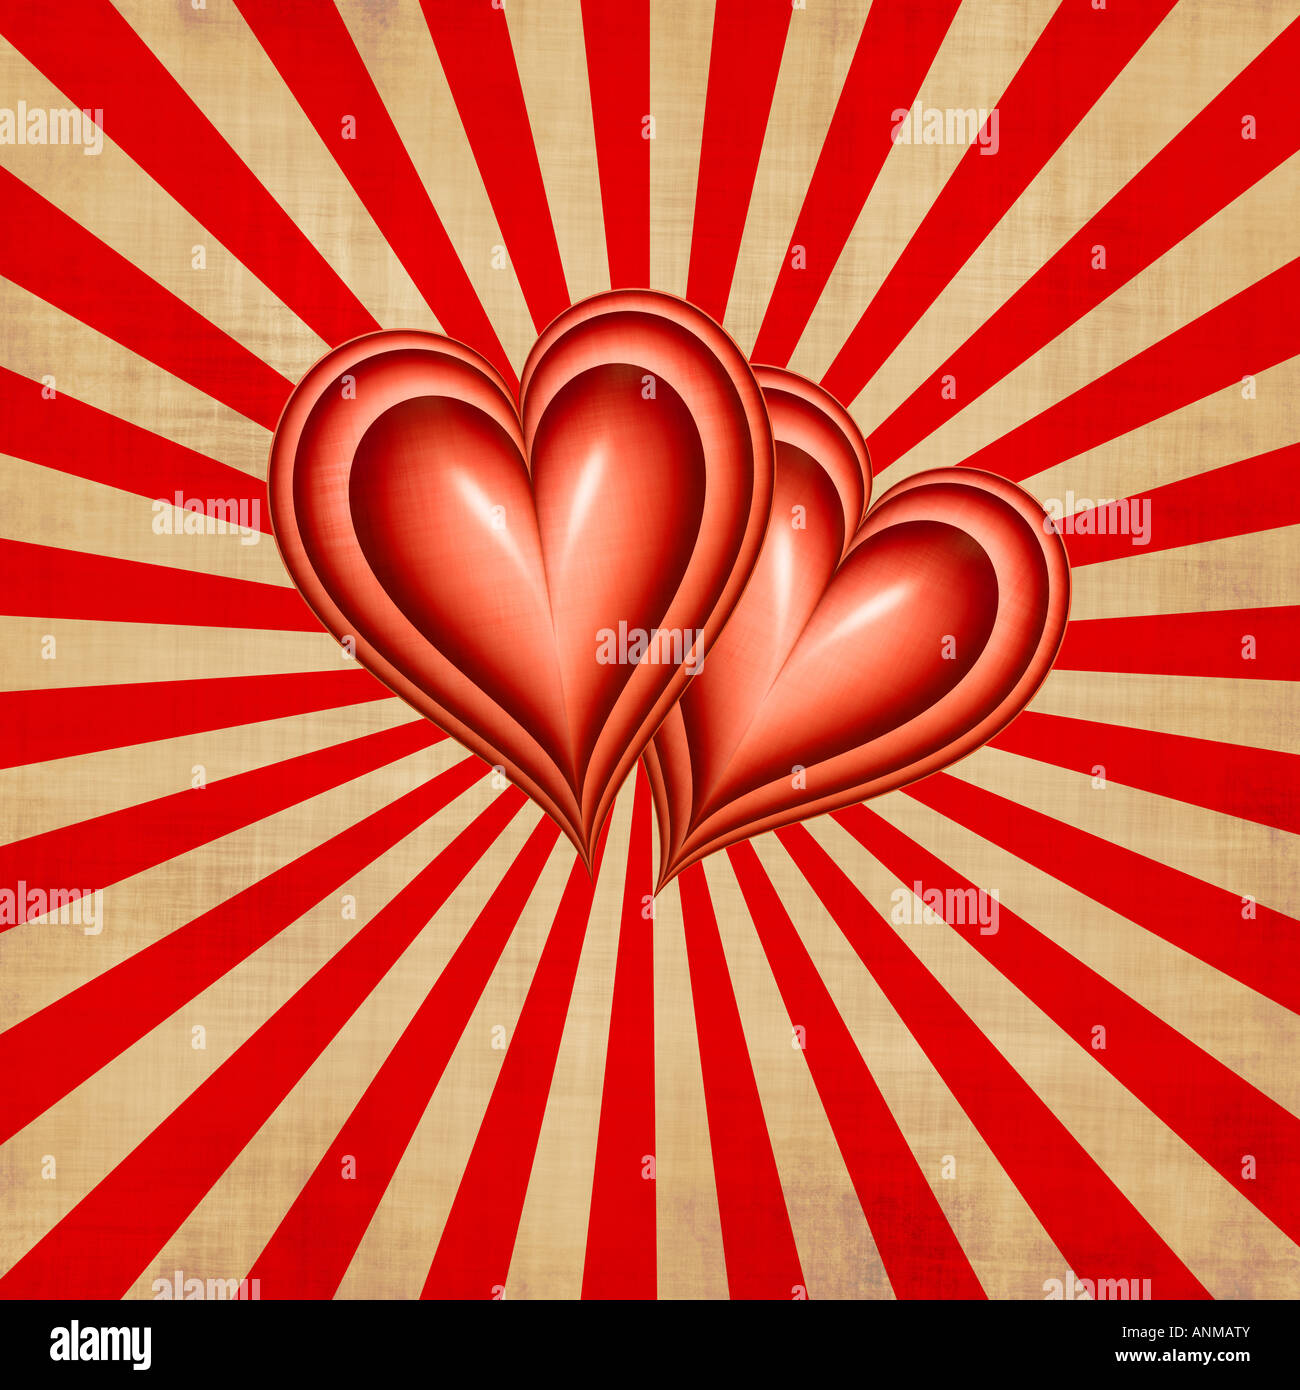 two hearts together on textured beam style background Stock Photo